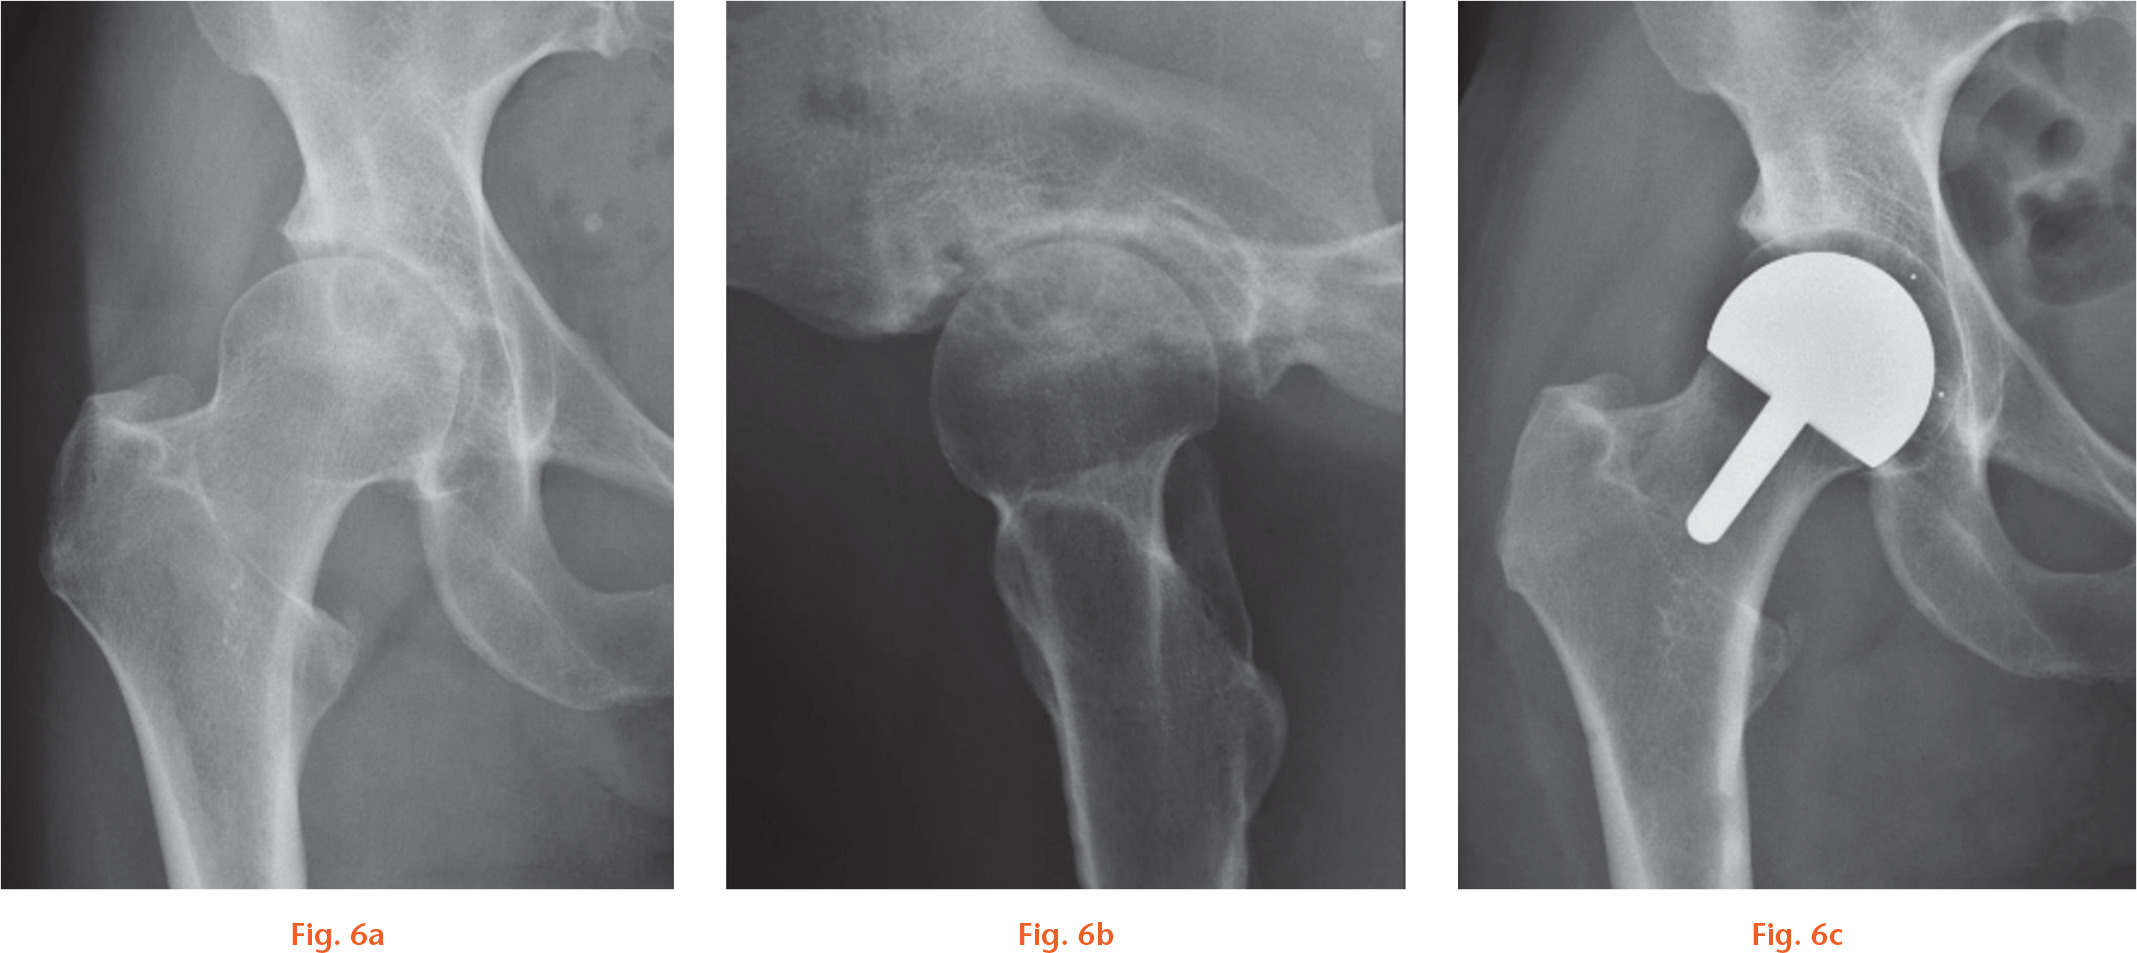 Fig. 6 
          Radiological series of a 50-year-old female expedition travel agent and county golf coach: a) preoperatively; b) immediately postoperatively; and c) at three months. She was unable to work due to pain and requested a hip resurfacing, since her job required maintaining high activity levels. She returned to normal activity at work by three months.
        